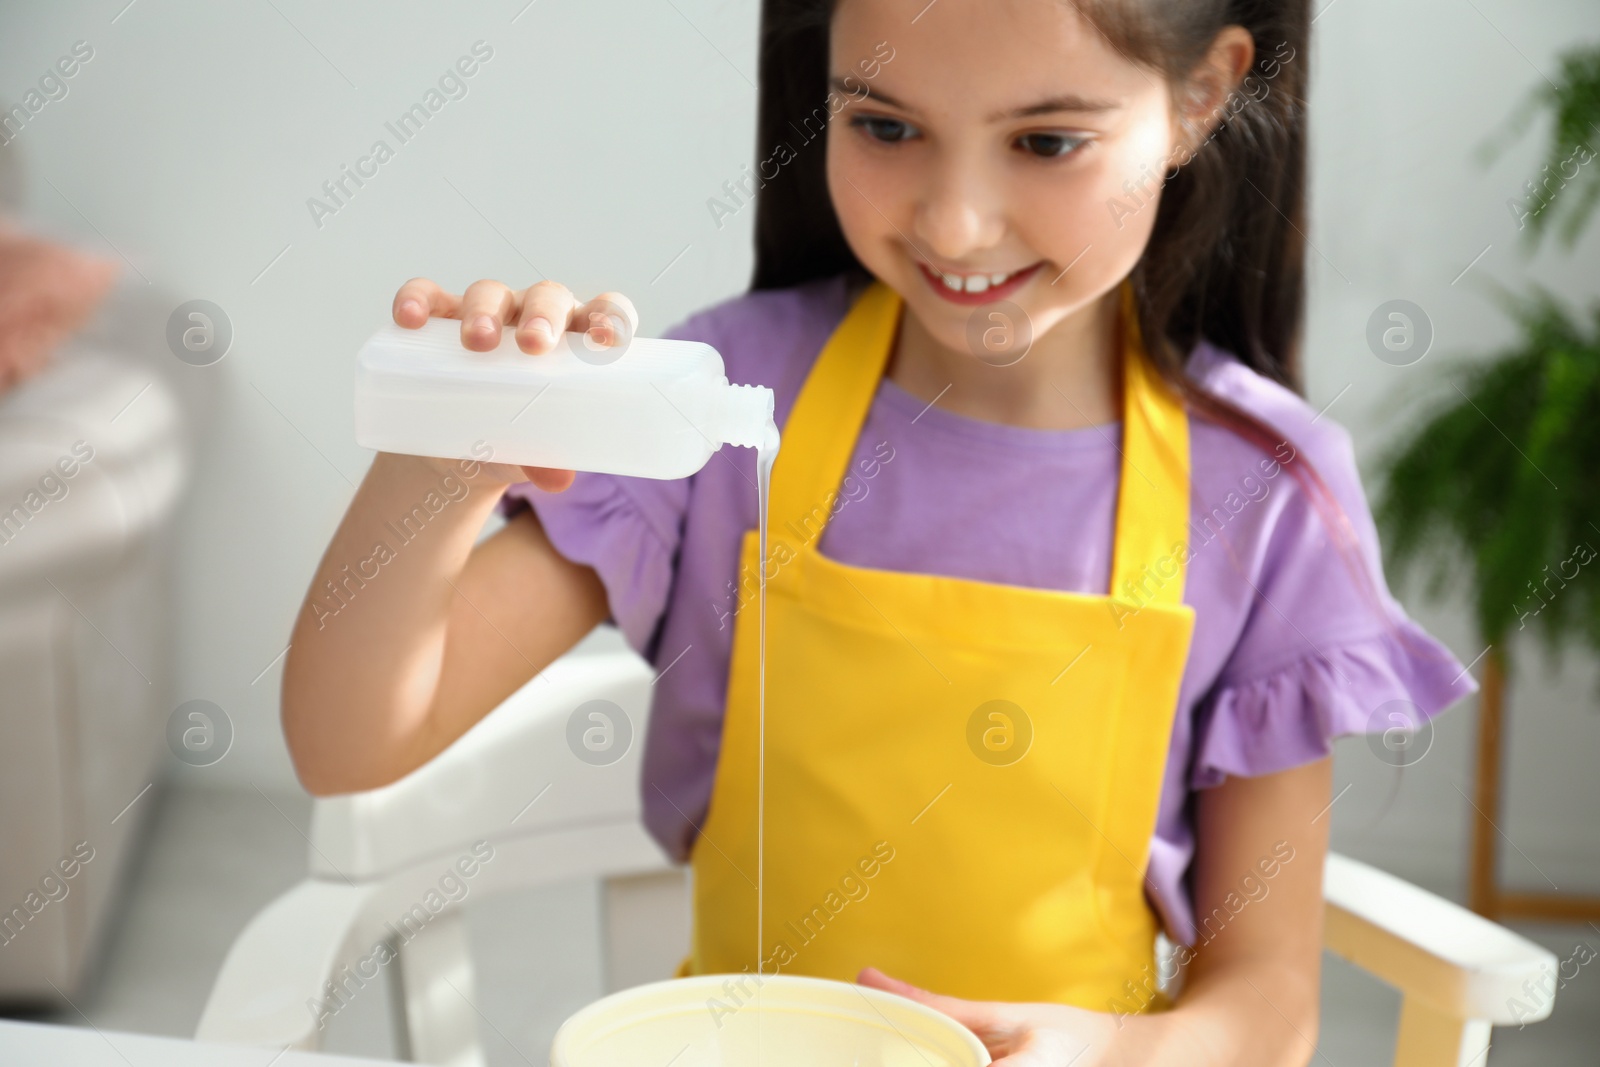 Photo of Cute little girl pouring glue into bowl at table in room. DIY slime toy